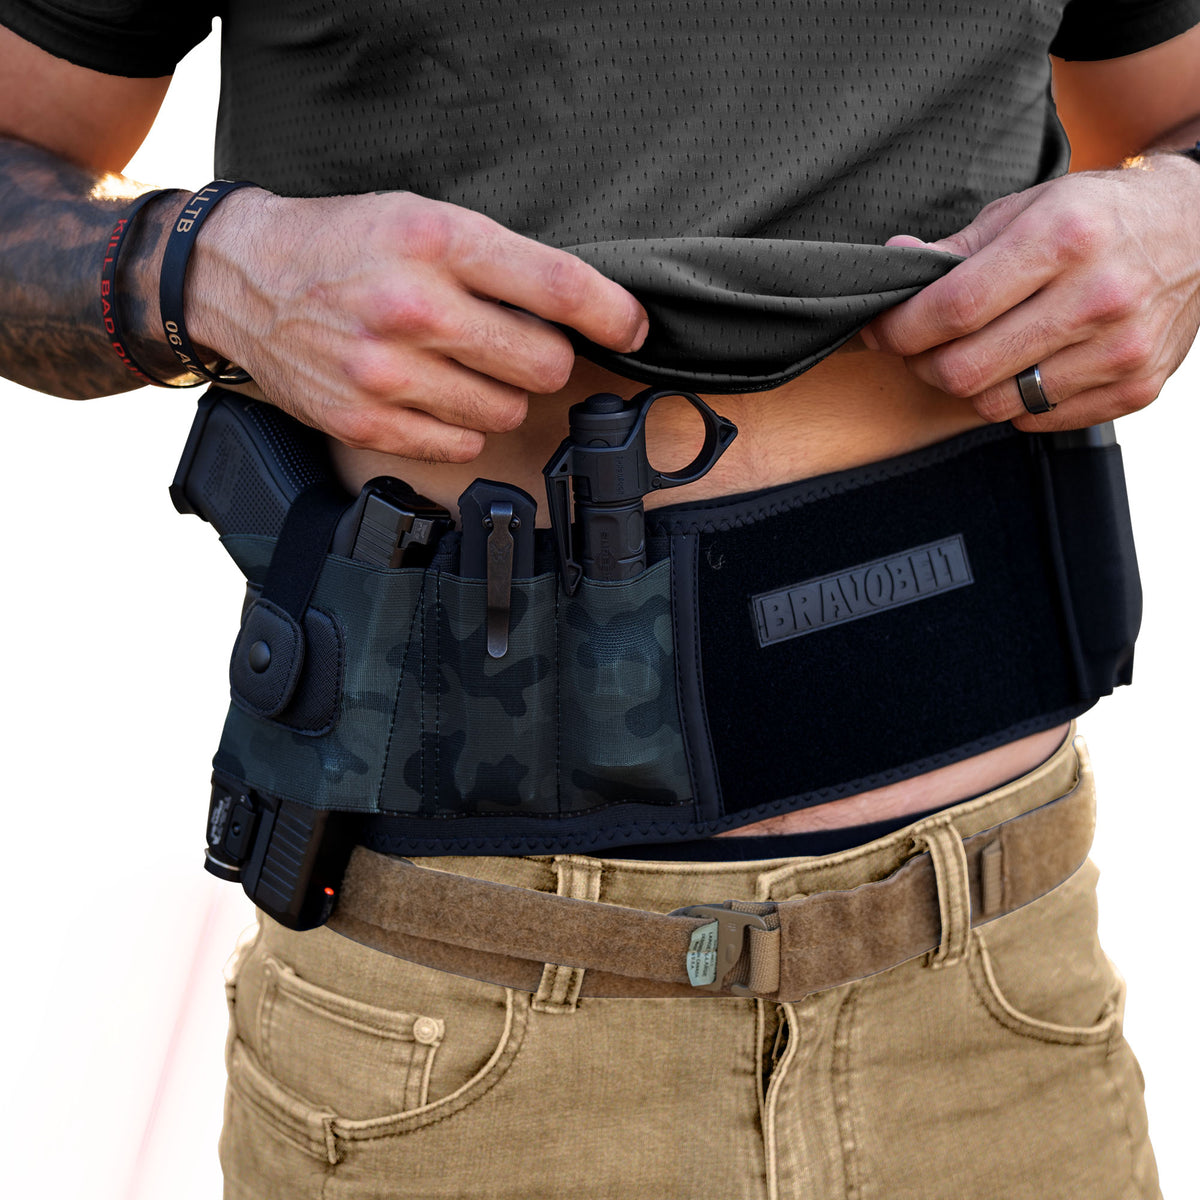 belly band holster camo unisex